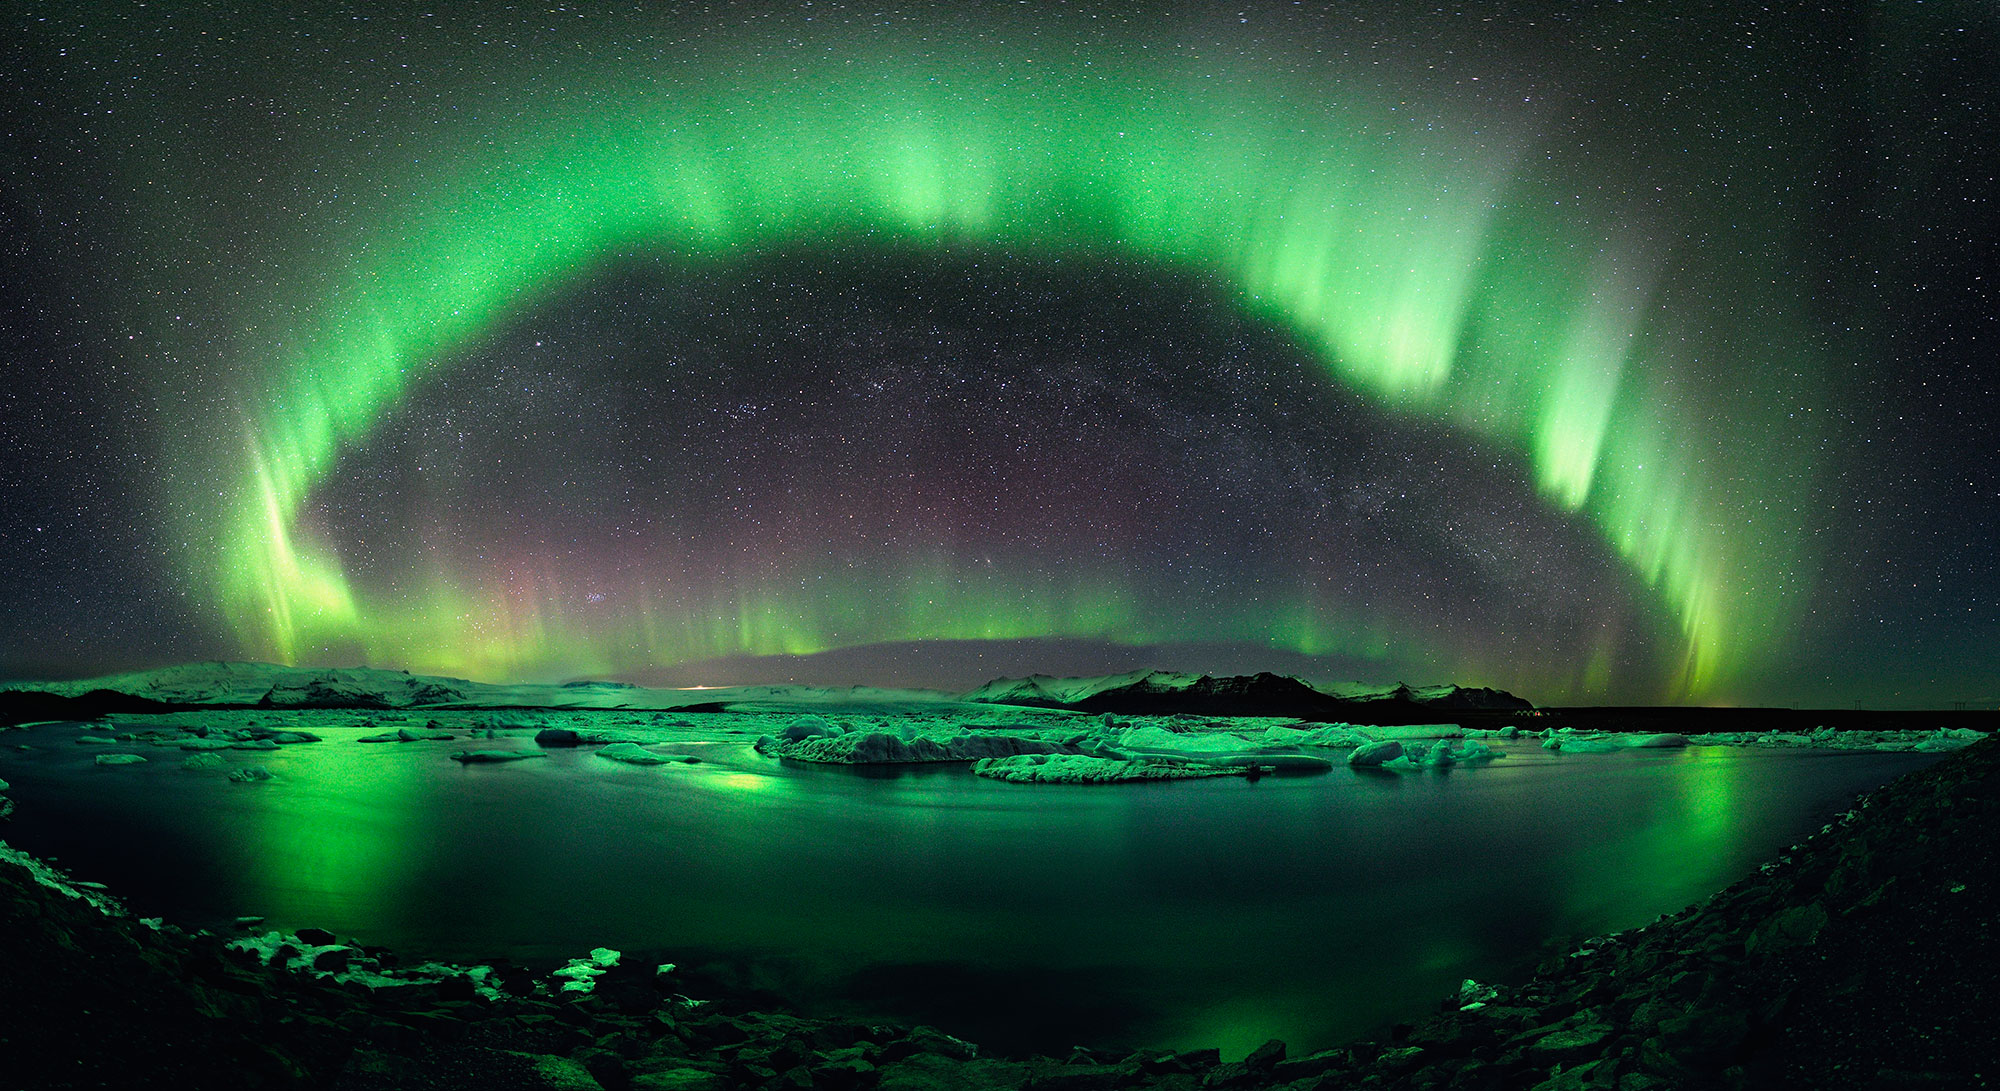 A stunning night view of the Aurora Borealis shimmering above a serene lake amidst nature's beauty.